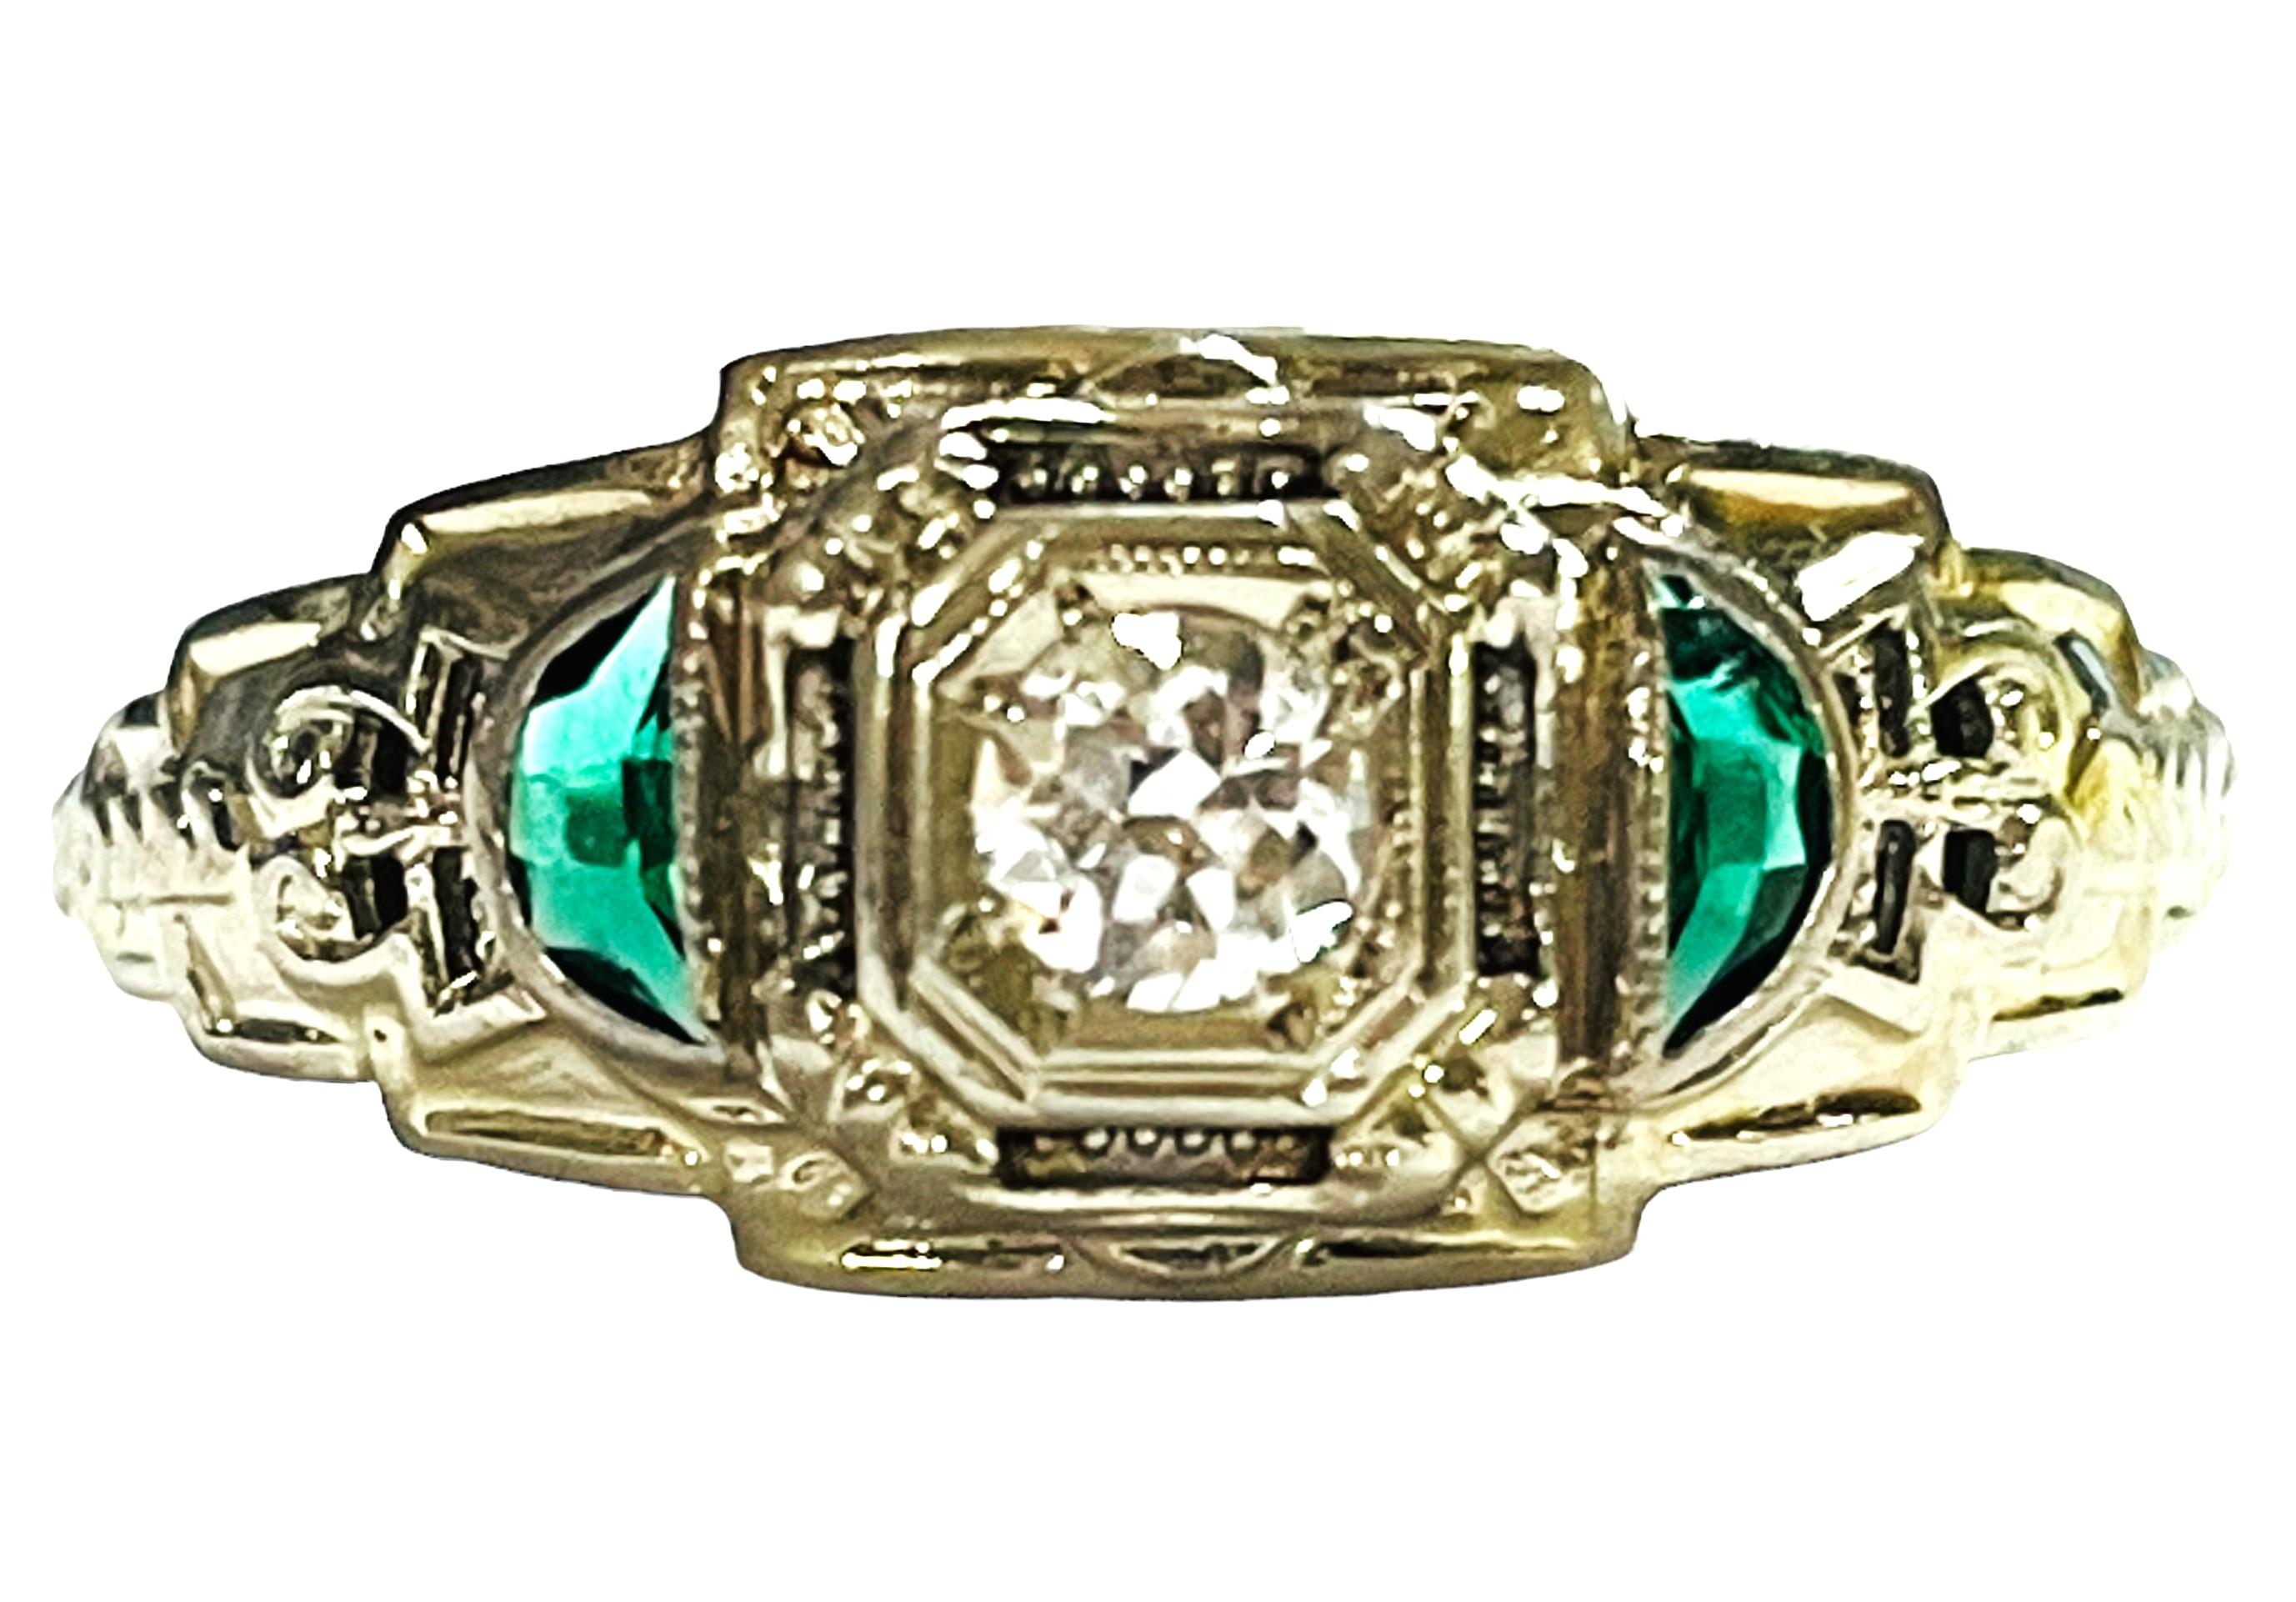 Round Cut Vintage 18K White Gold Diamond and Emerald Ring with Appraisal